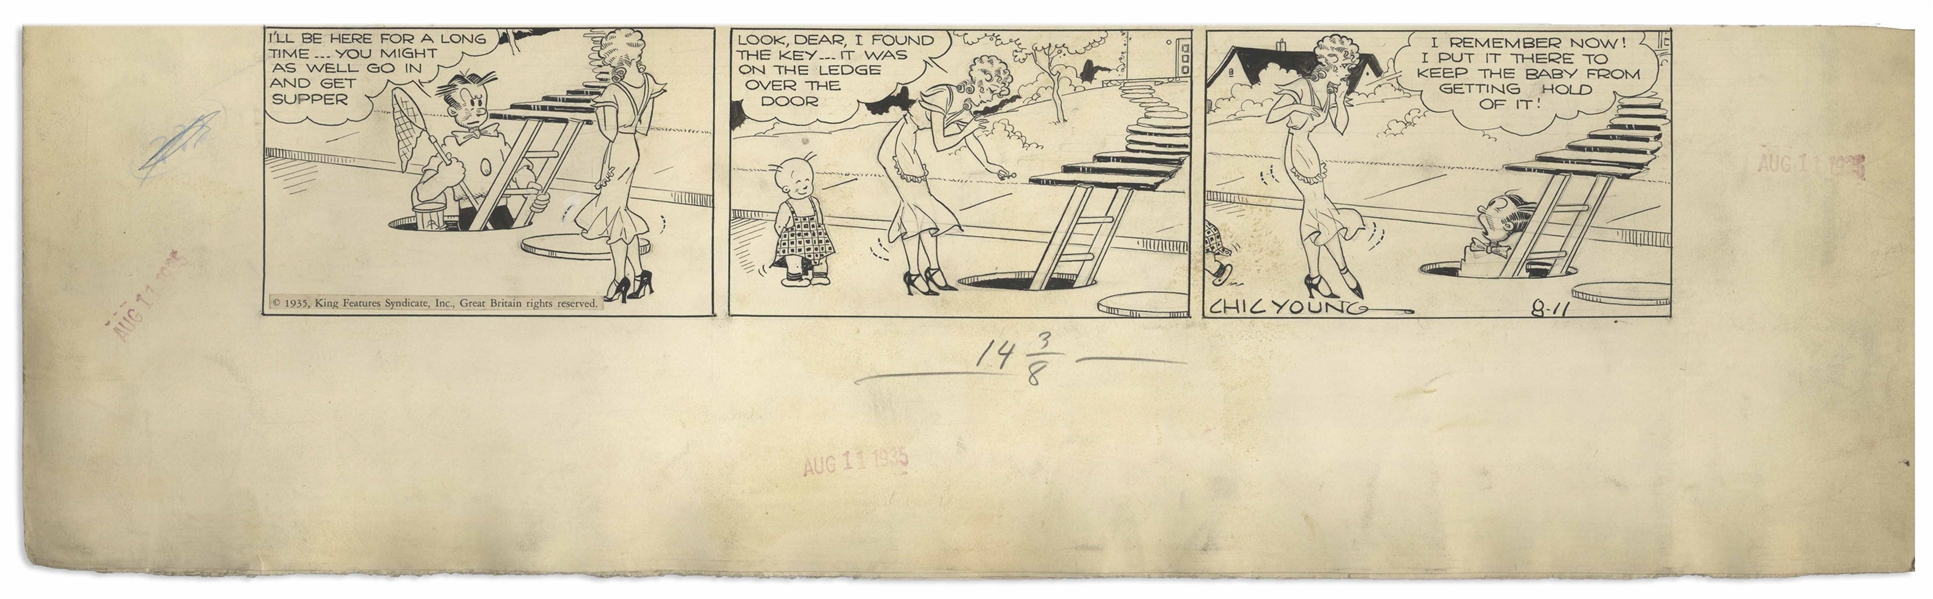 Chic Young Hand-Drawn ''Blondie'' Sunday Comic Strip From 1935 -- Blondie's Forgetfulness Causes Problems for Dagwood